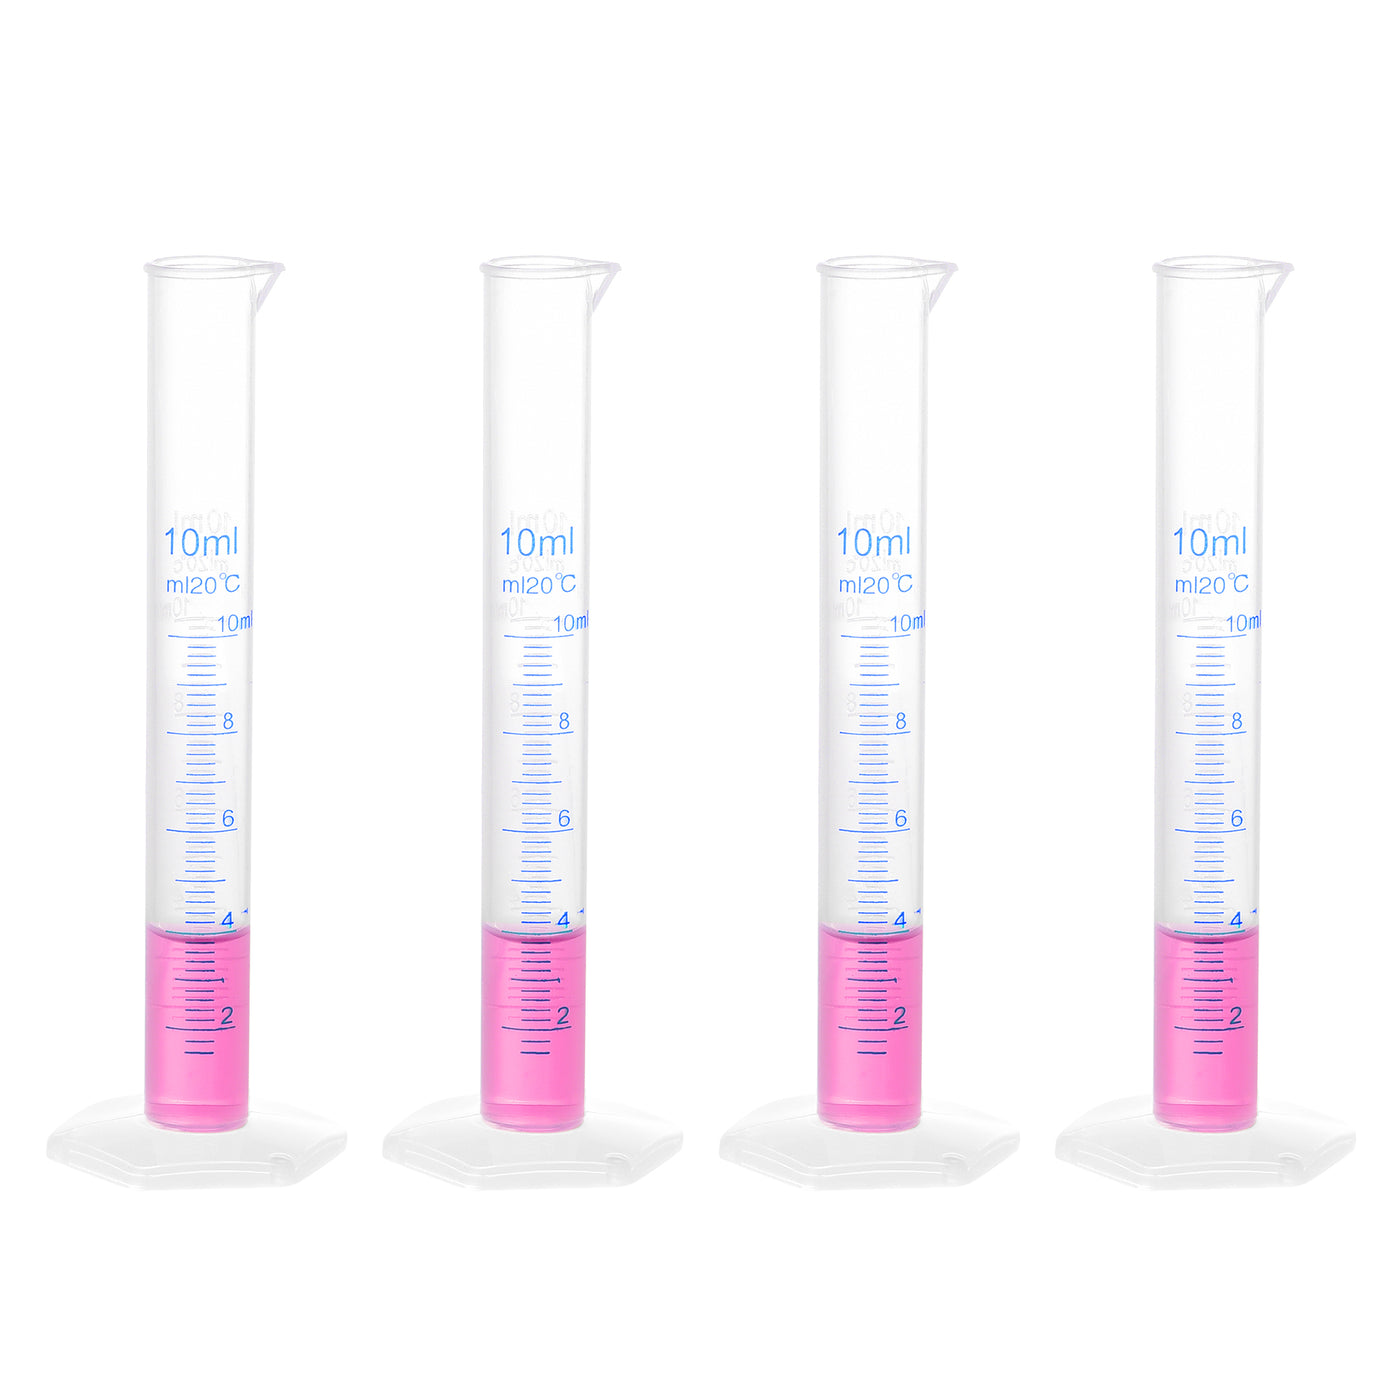 uxcell Uxcell Graduated Cylinder, 10ml Measuring Cylinder, 2-Sided Metric Marking, 4Pcs